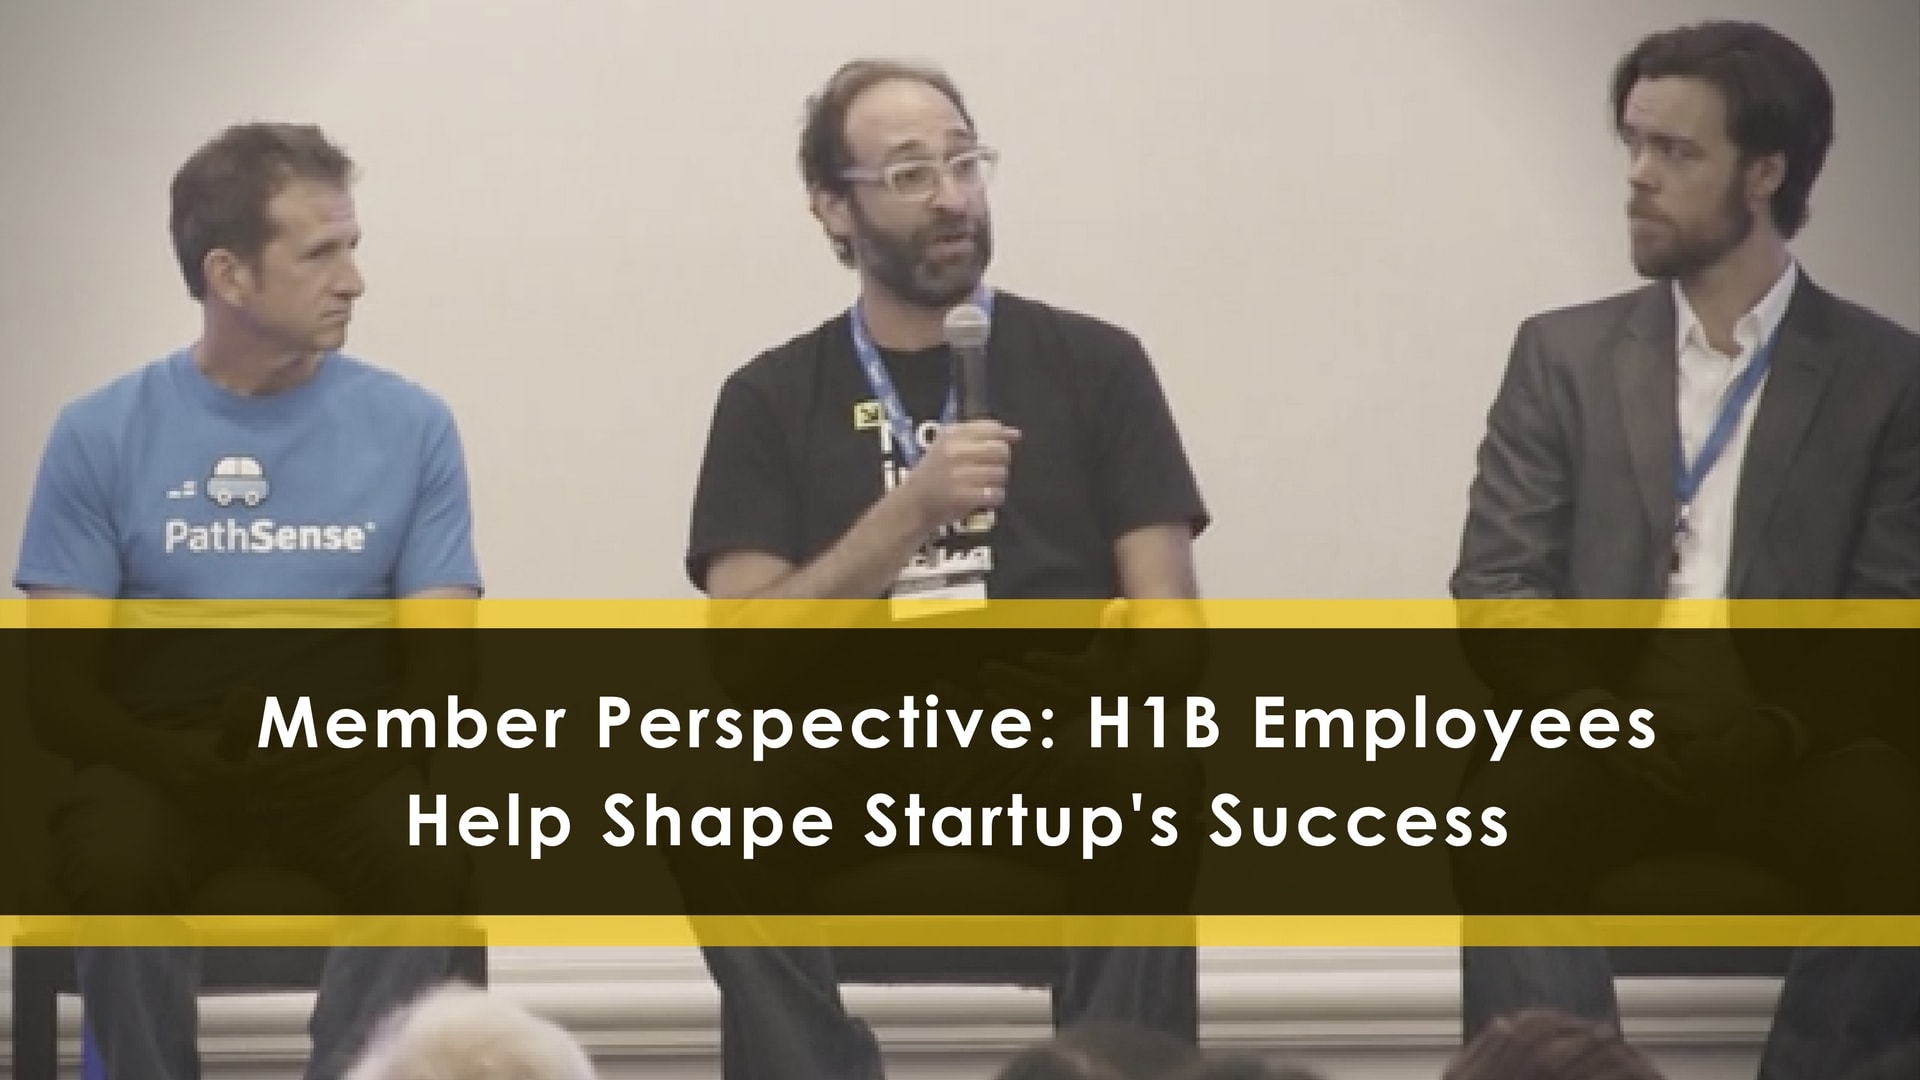 Member Perspective: H1B Employees Help Shape Startup’s Success